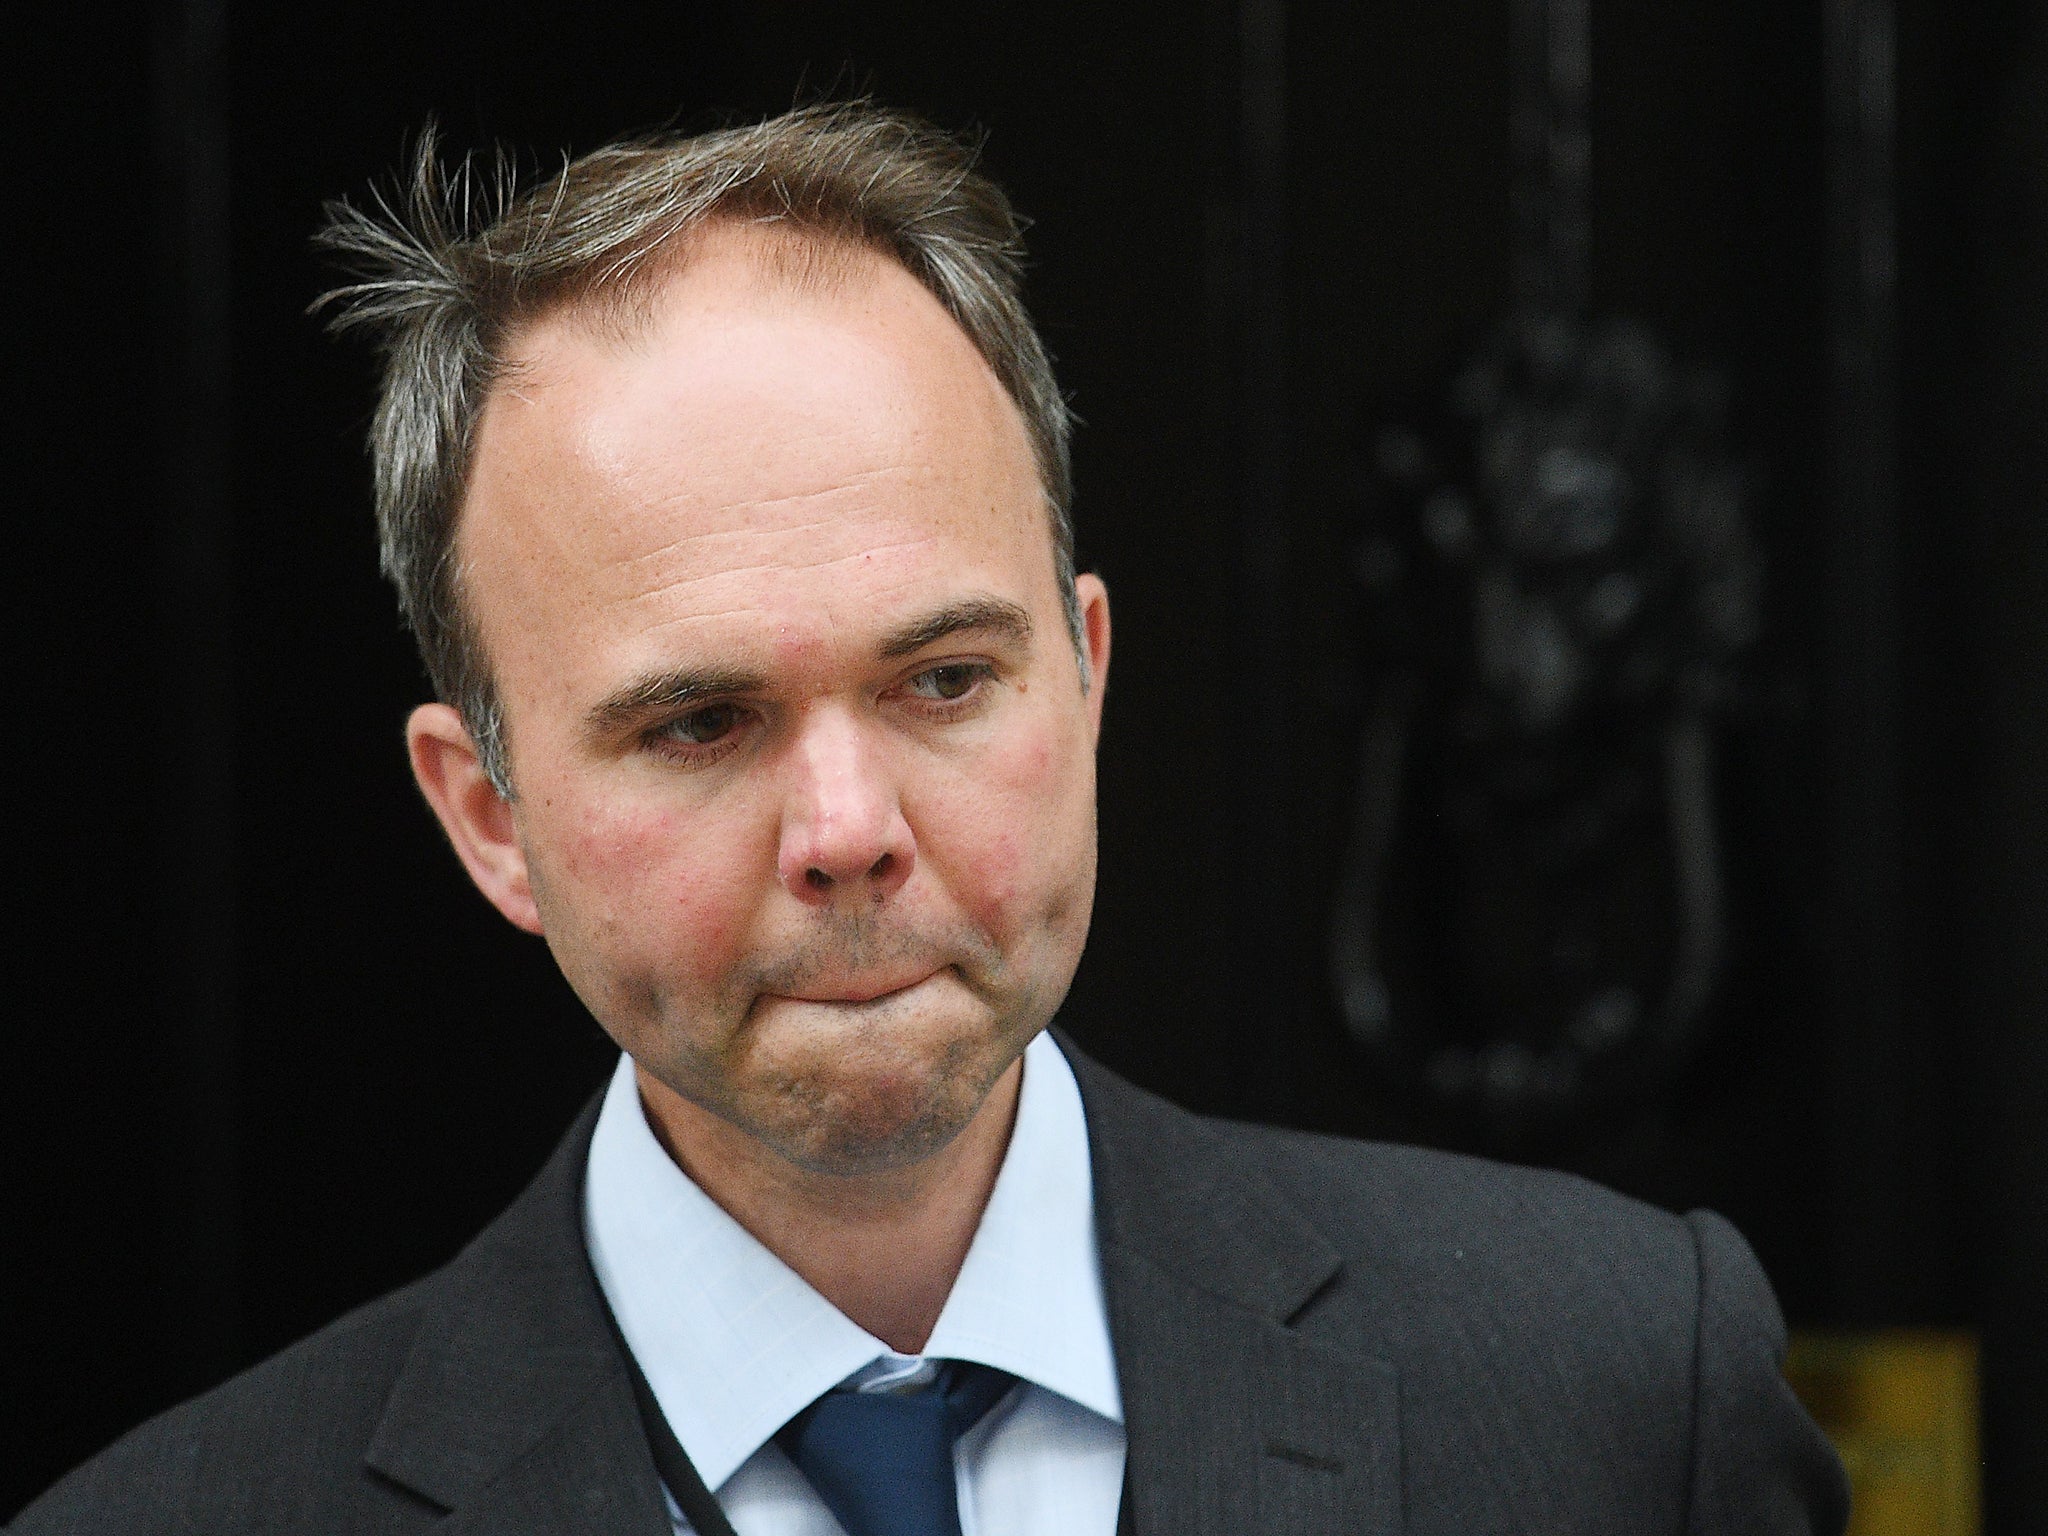 It is not the first time Gavin Barwell has been embarrassed on social media